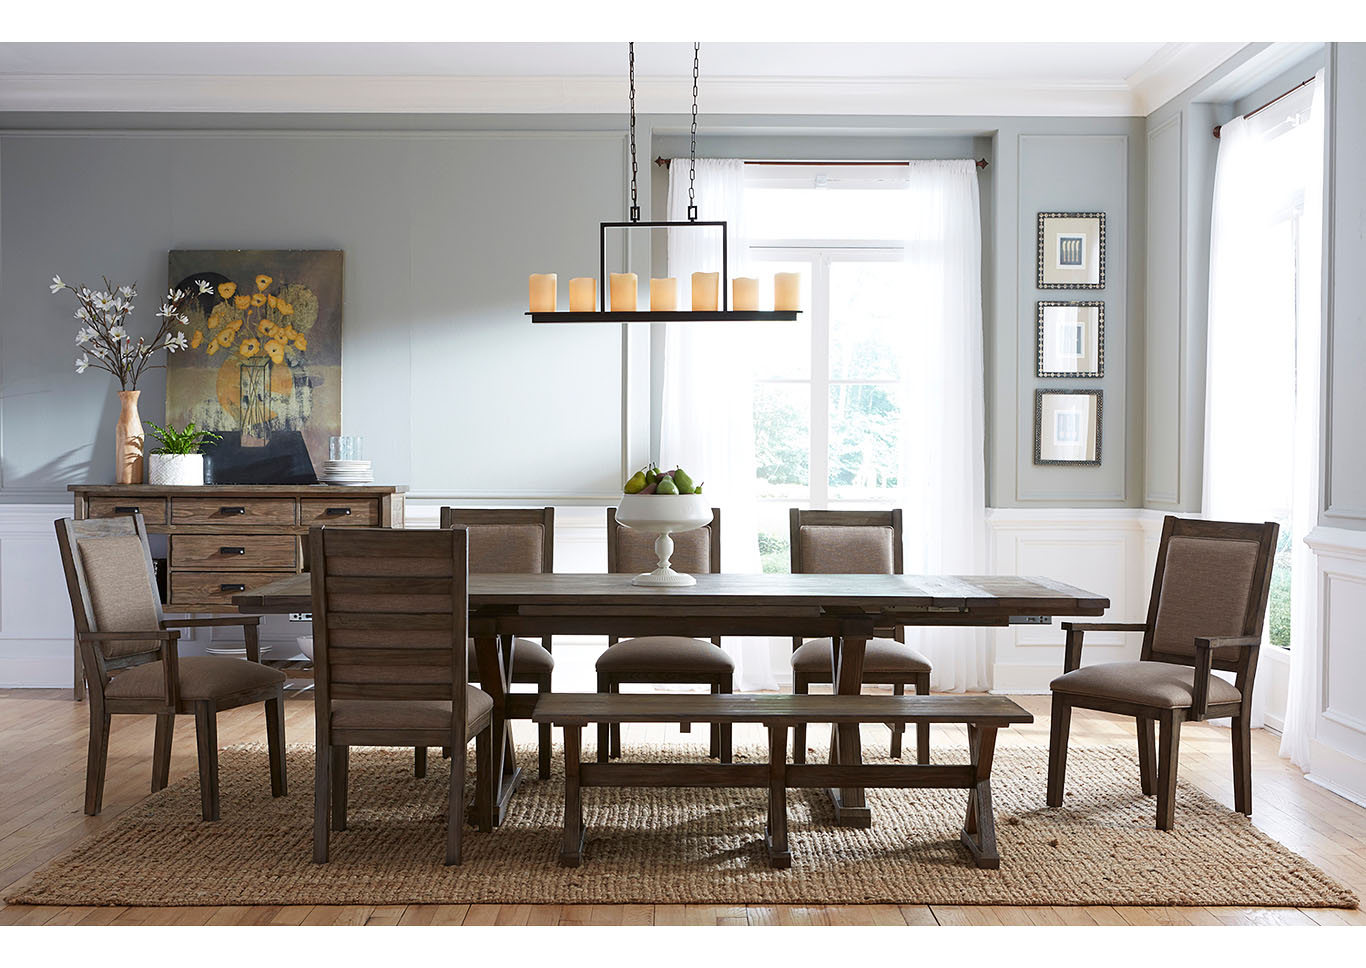 Foundry Driftwood Dining Set w/4 Upholstered Side Chairs, 2 Upholstered Arm Chairs & Bench,Kincaid